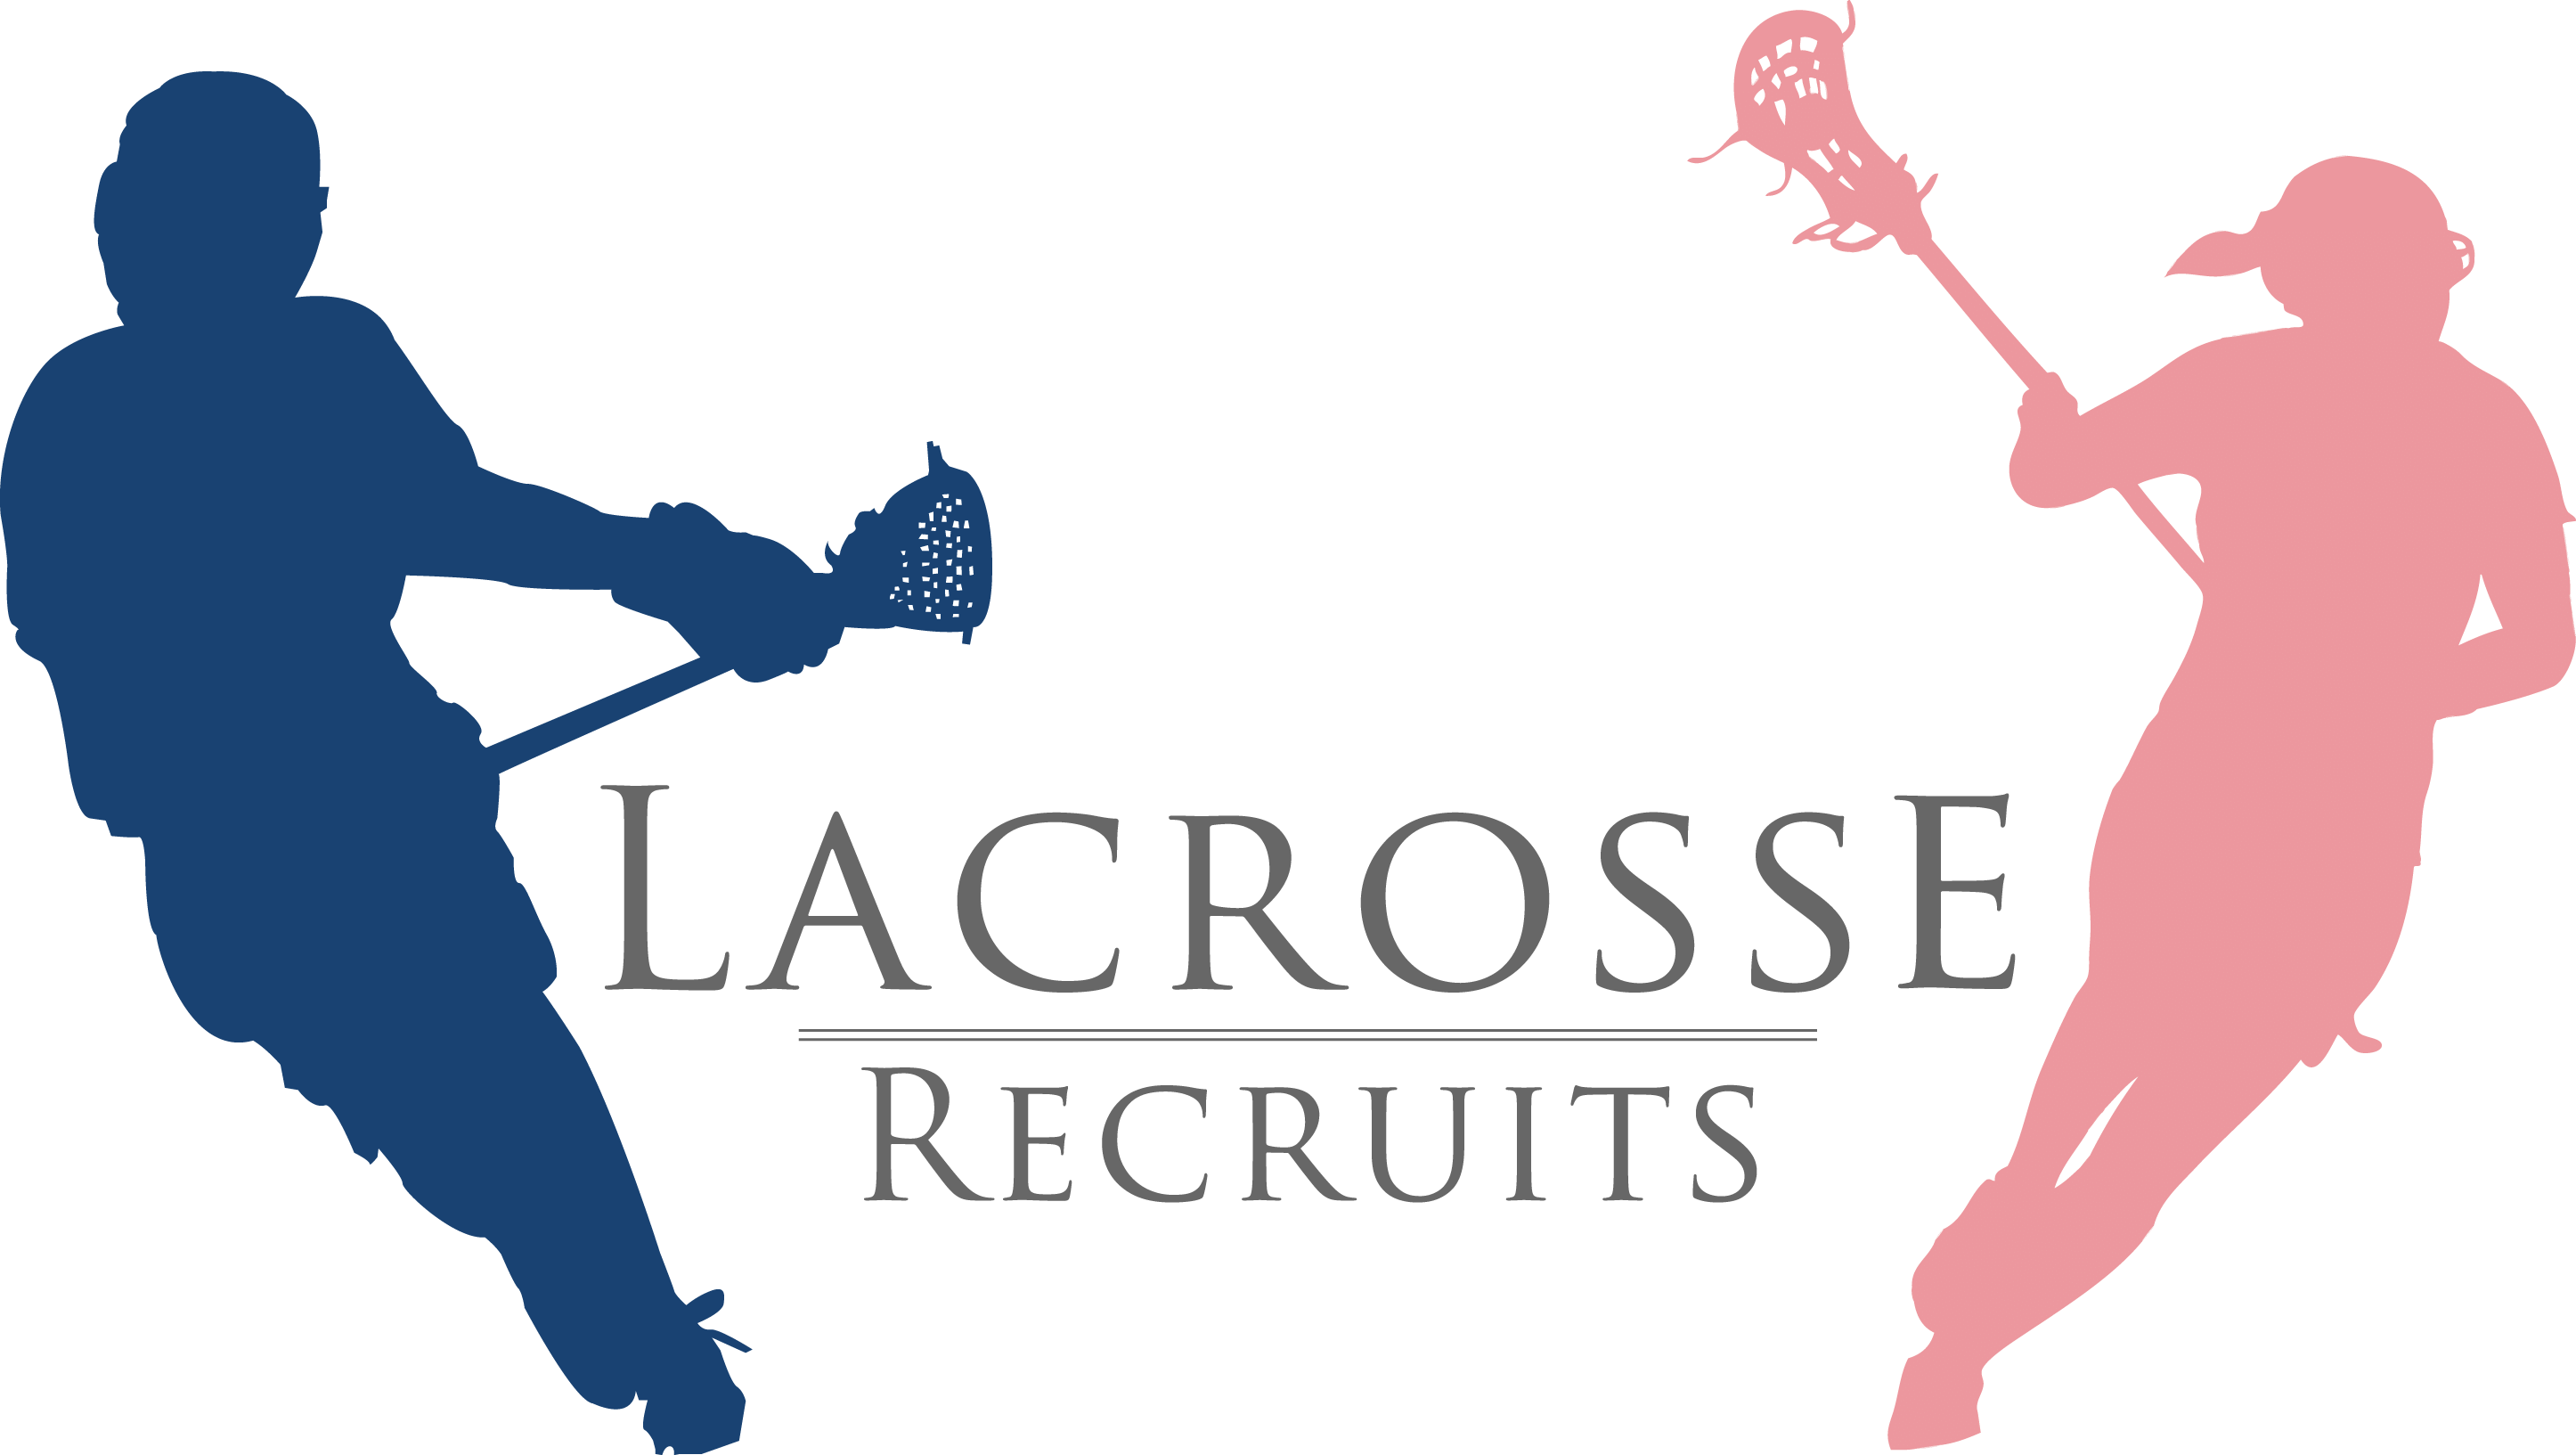 Girl player at getdrawings. Lacrosse clipart silhouette